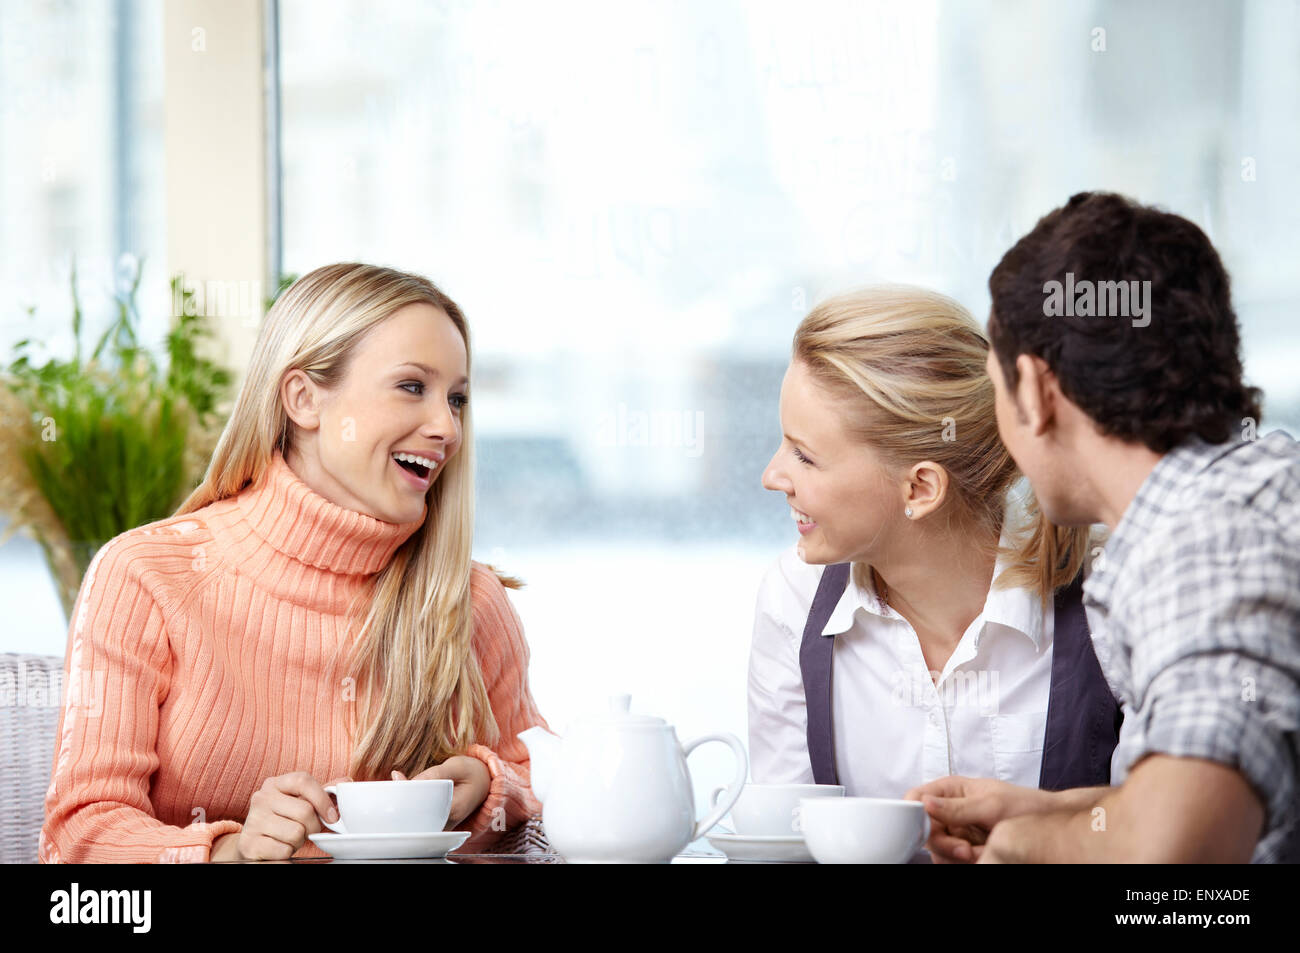 Smiling people drink coffee in the foreground Stock Photo